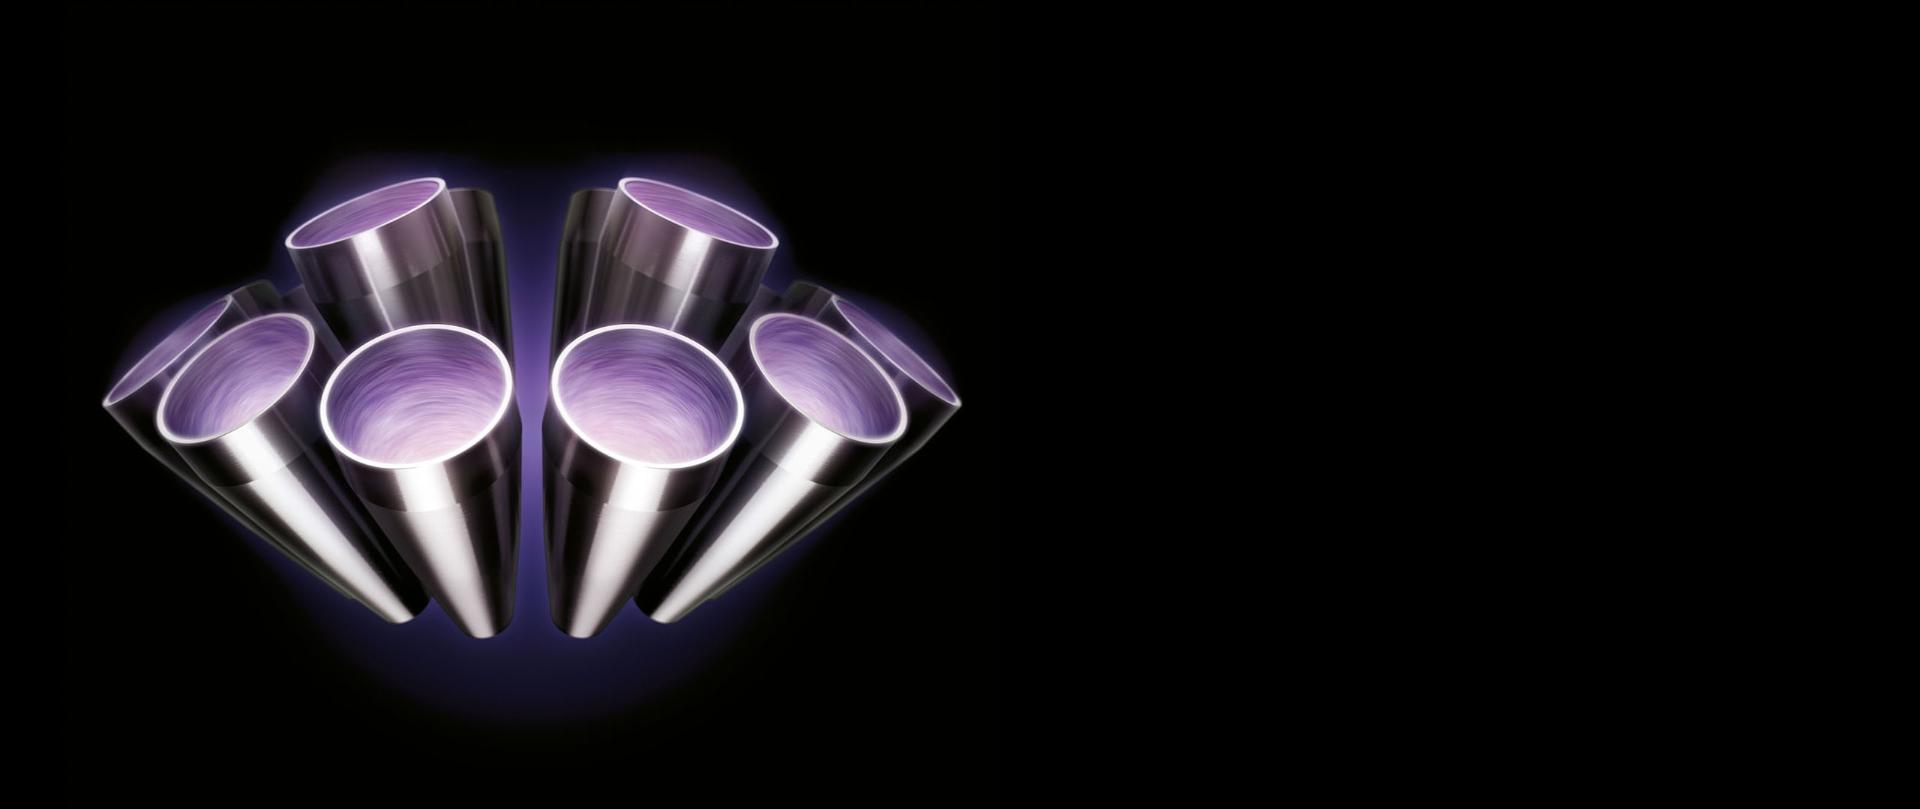 Animations of Dyson Cyclone V10™ technology